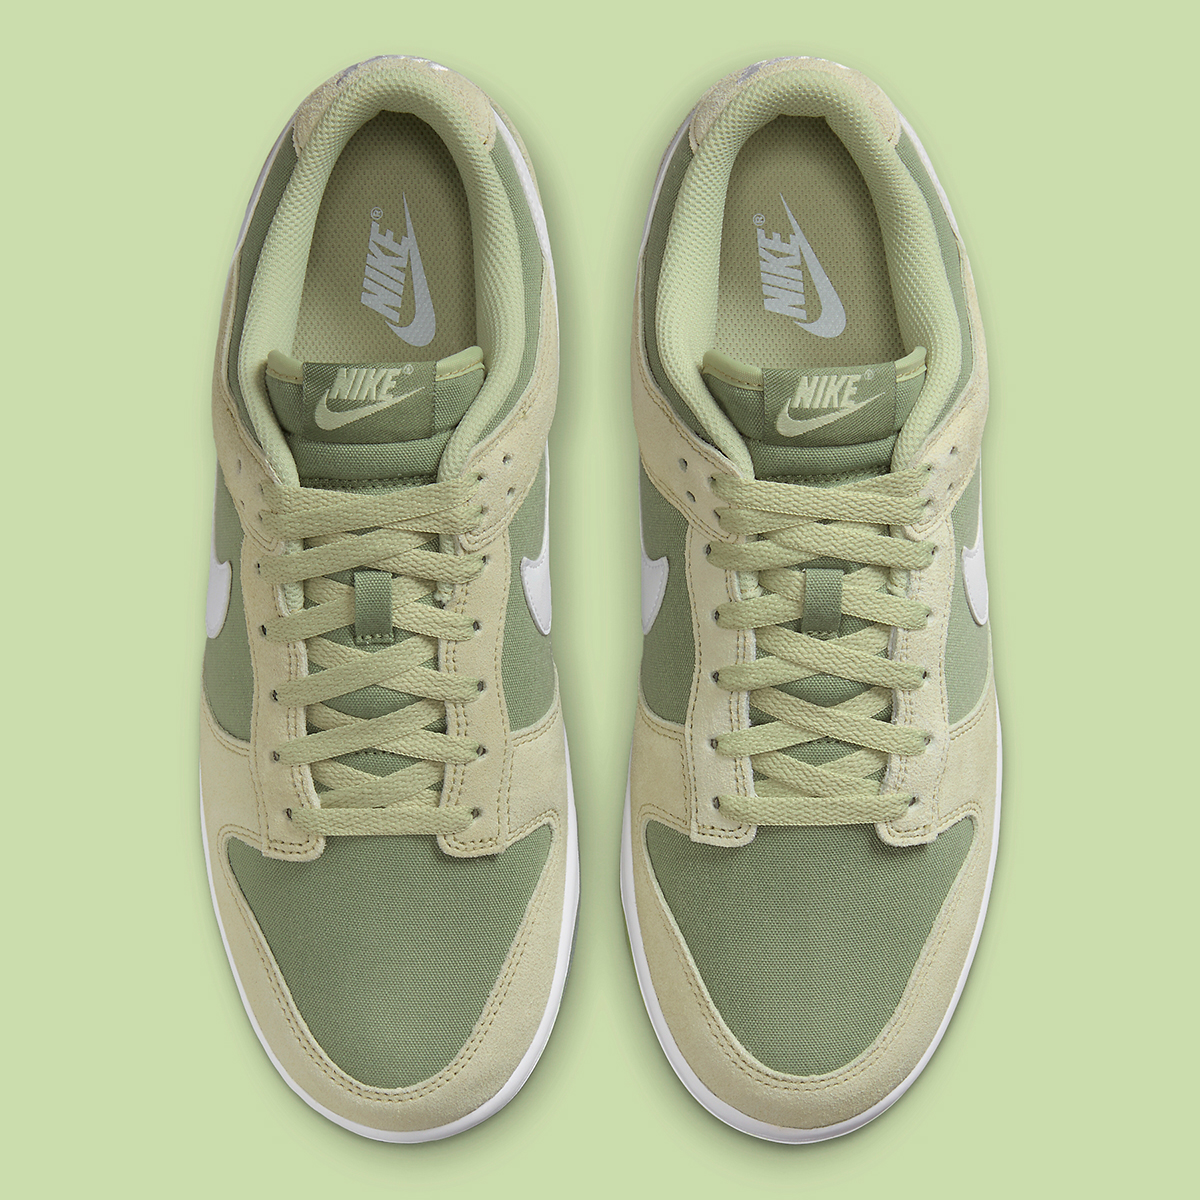 Nike Dunk Low Oil Green White Olive Aura Bright Cactus Hm9651 300 6